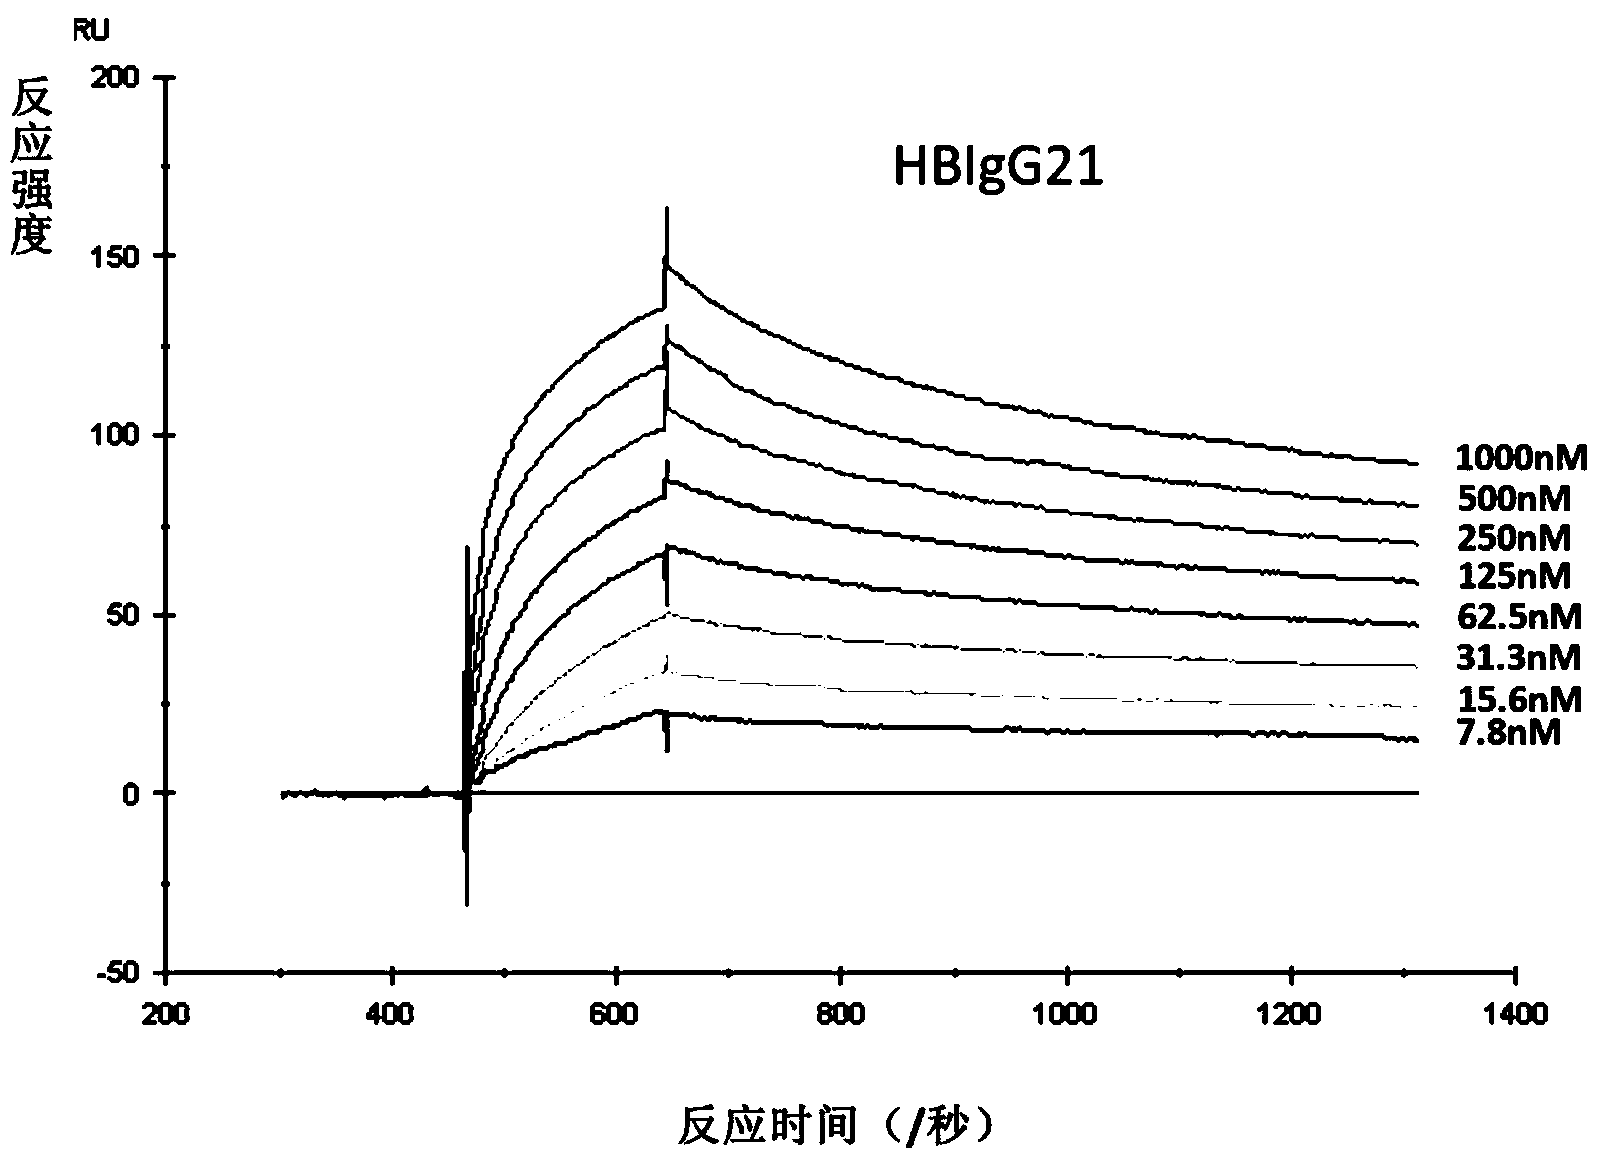 Human anti-HBV surface antigen genetic engineering antibody, and preparation method and application thereof